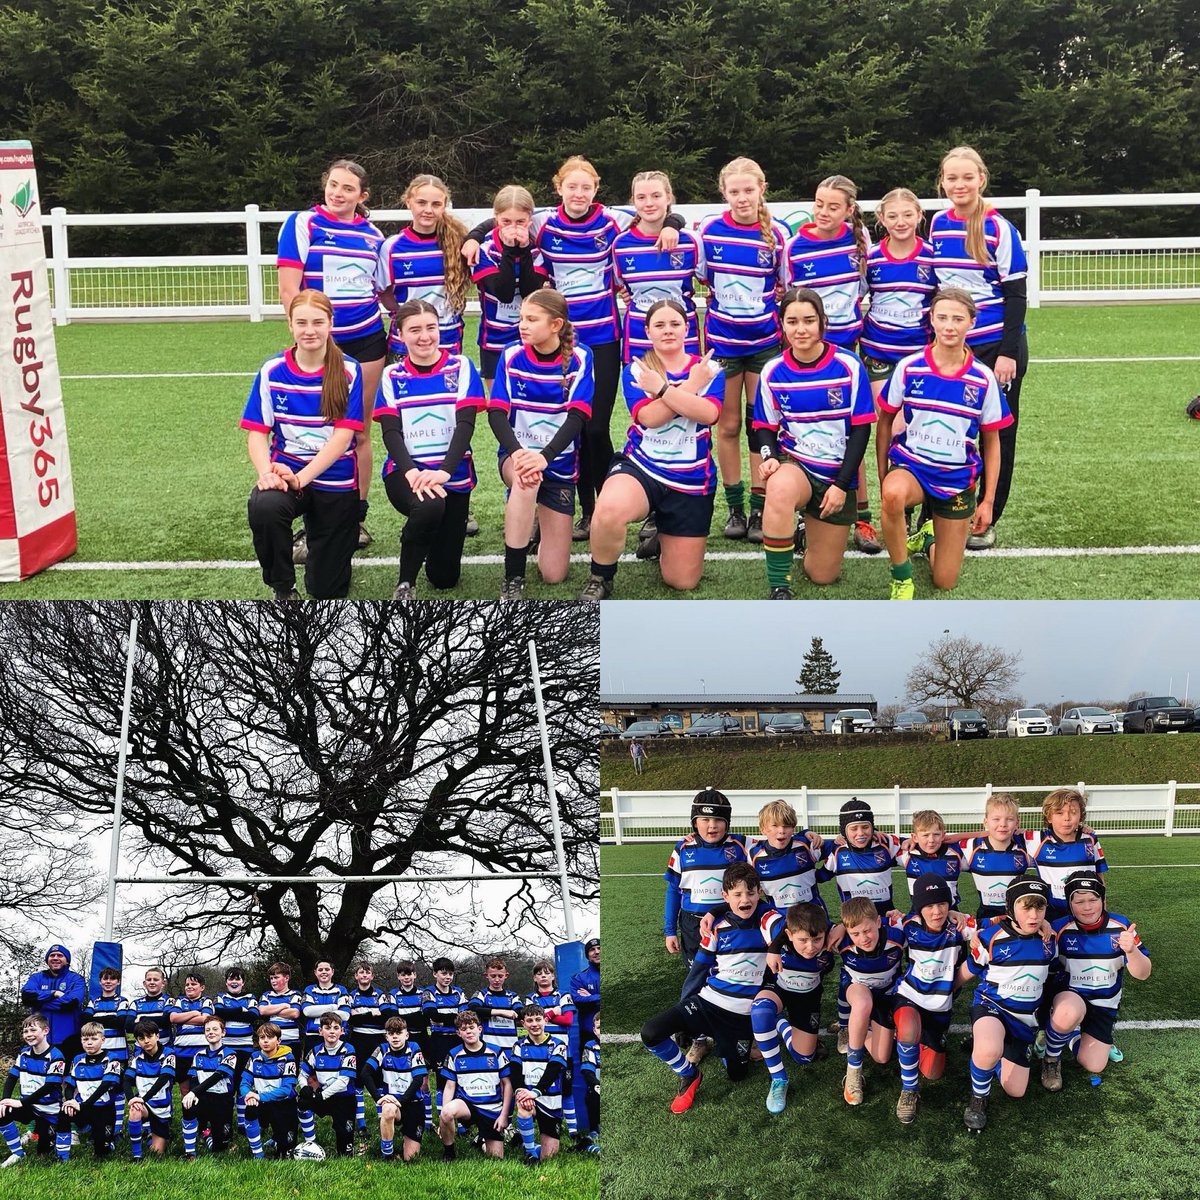 🔵⚪️⚫️Sponsor shout-out🔵⚪️⚫️ A massive thank you to Simple life homes for sponsoring 4 of our junior teams this season, their new kits have arrived and it’s very exciting that the girls are now in the same kit as the women 😍 #yorkshire #grassroots #oneclub #breakthemould